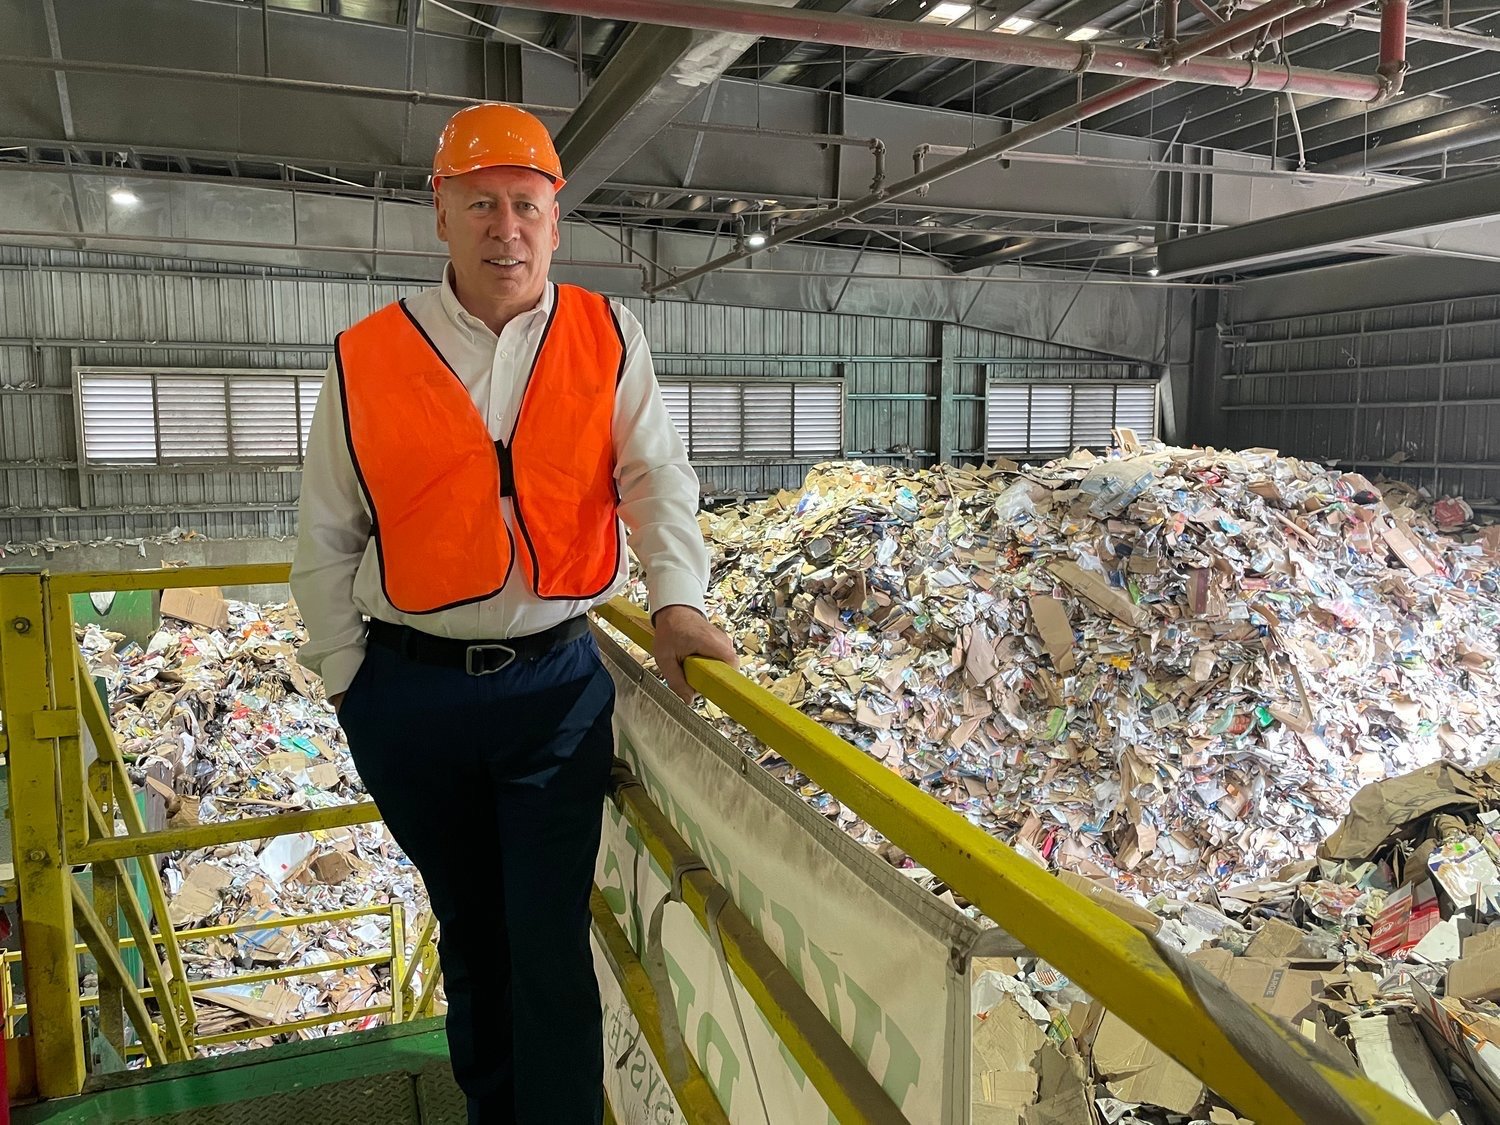 Winters Bros. senior vice president Will Flower plans to build a rail-transfer station in Yaphank to haul the area’s garbage out of Long Island in the future after the landfill closes.